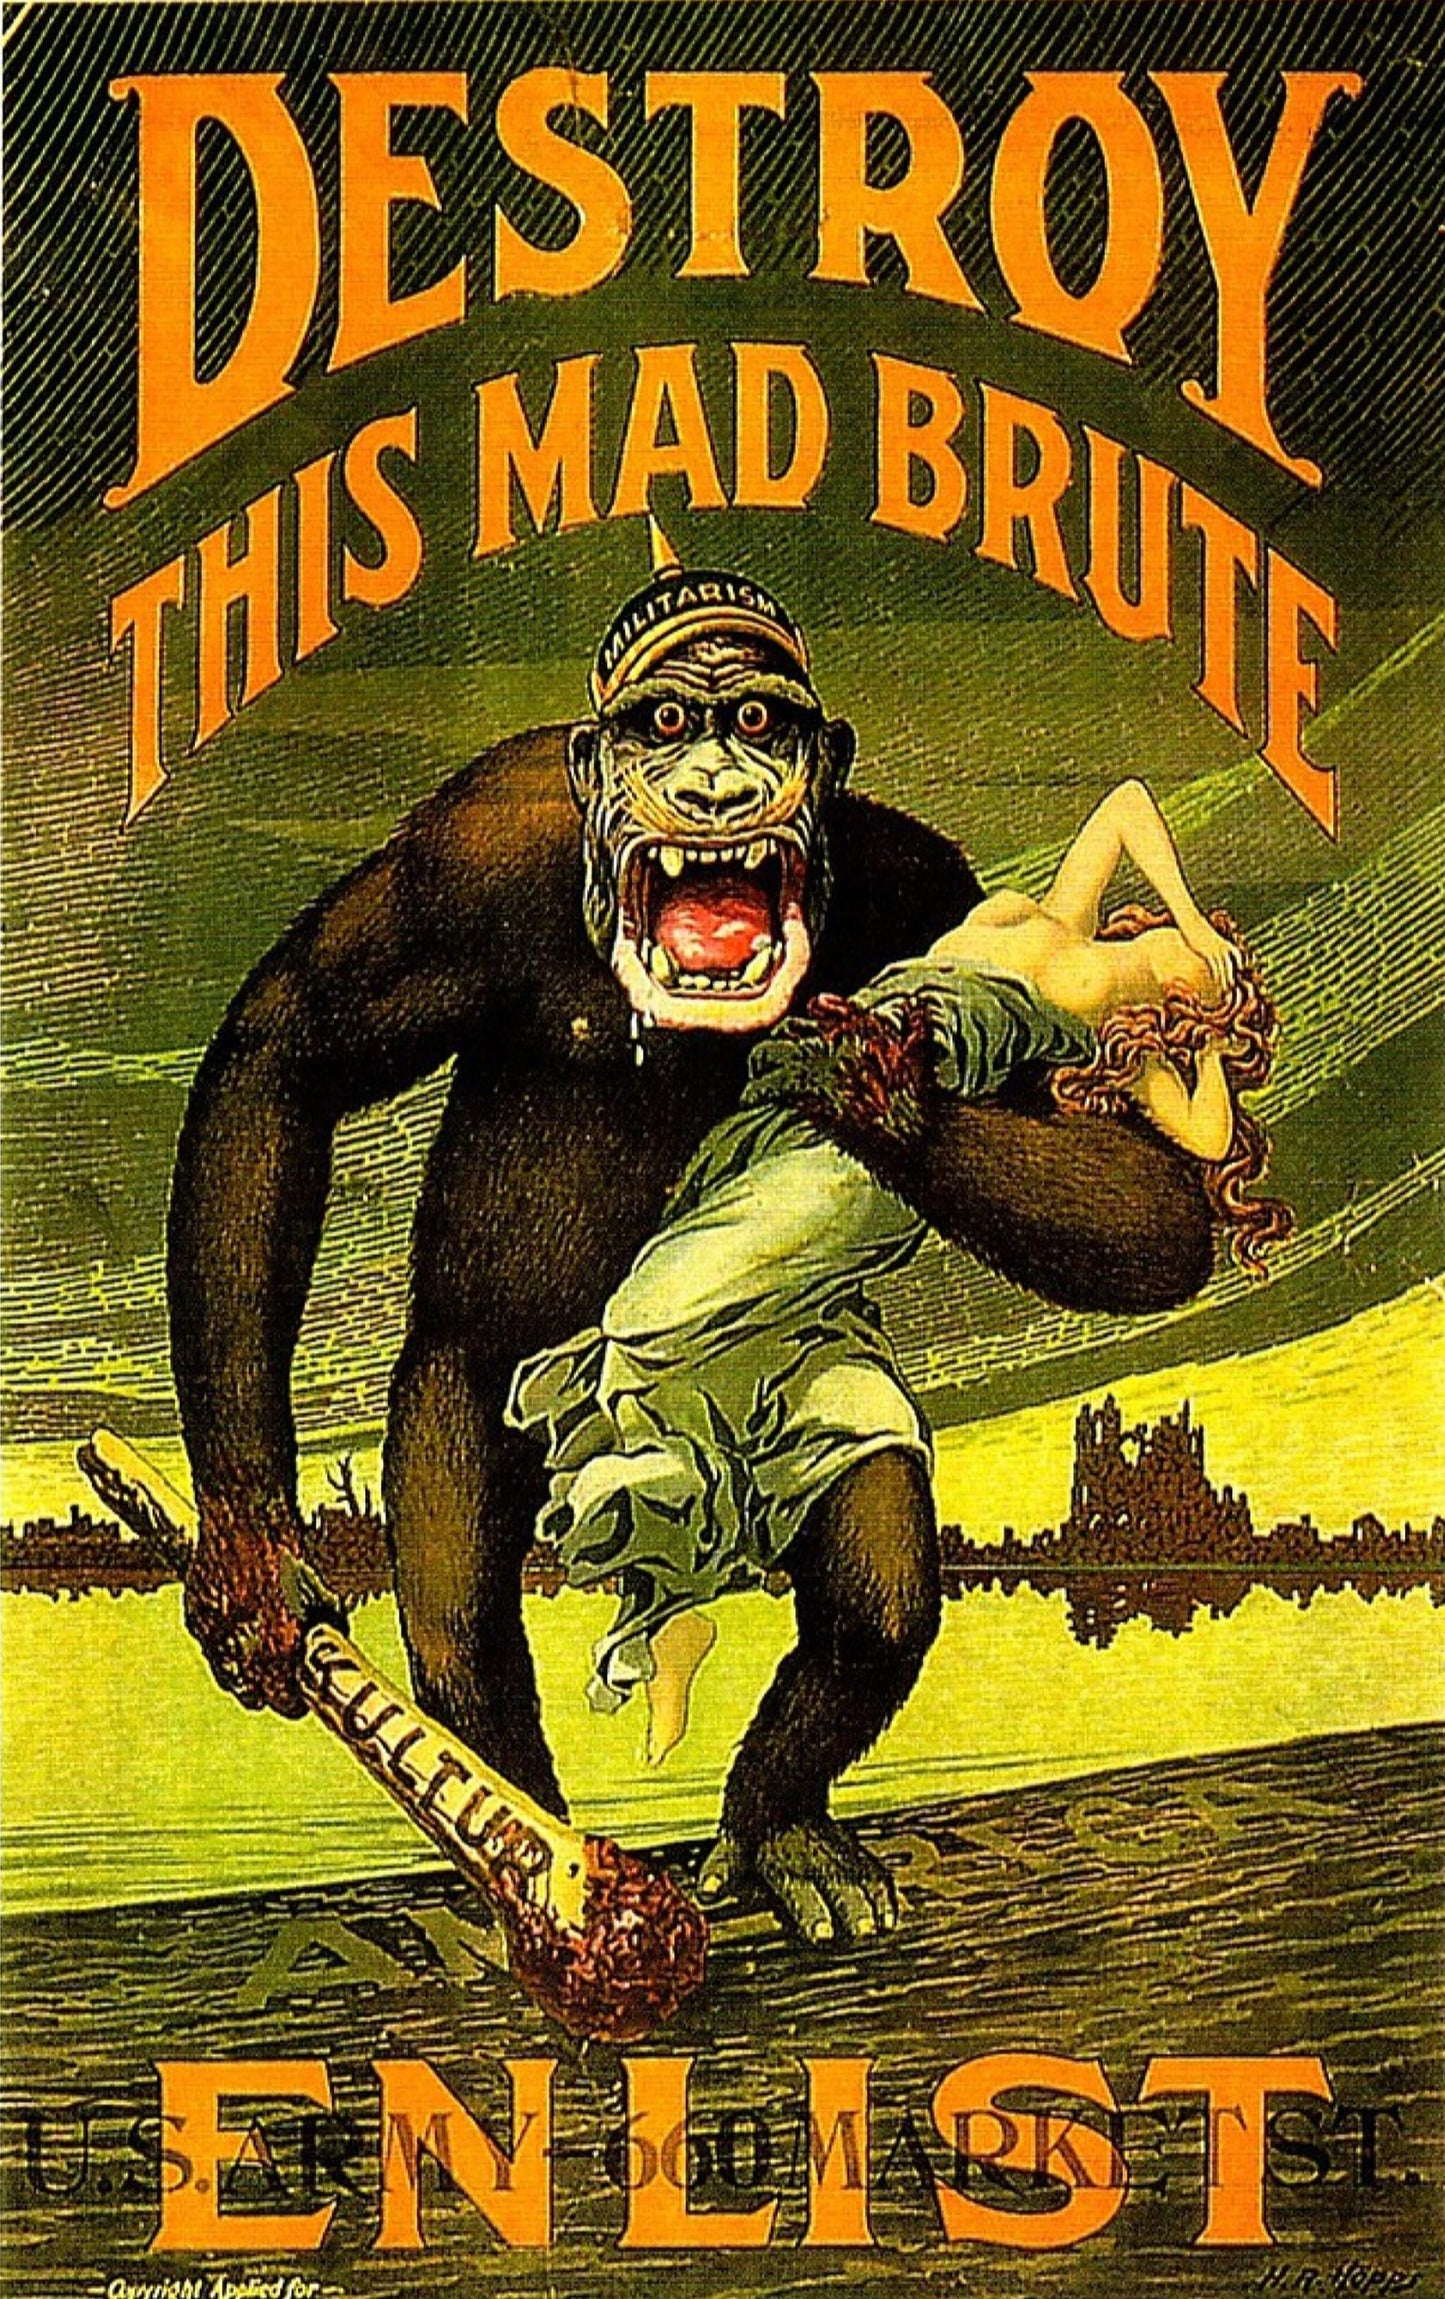 The Mad Brute